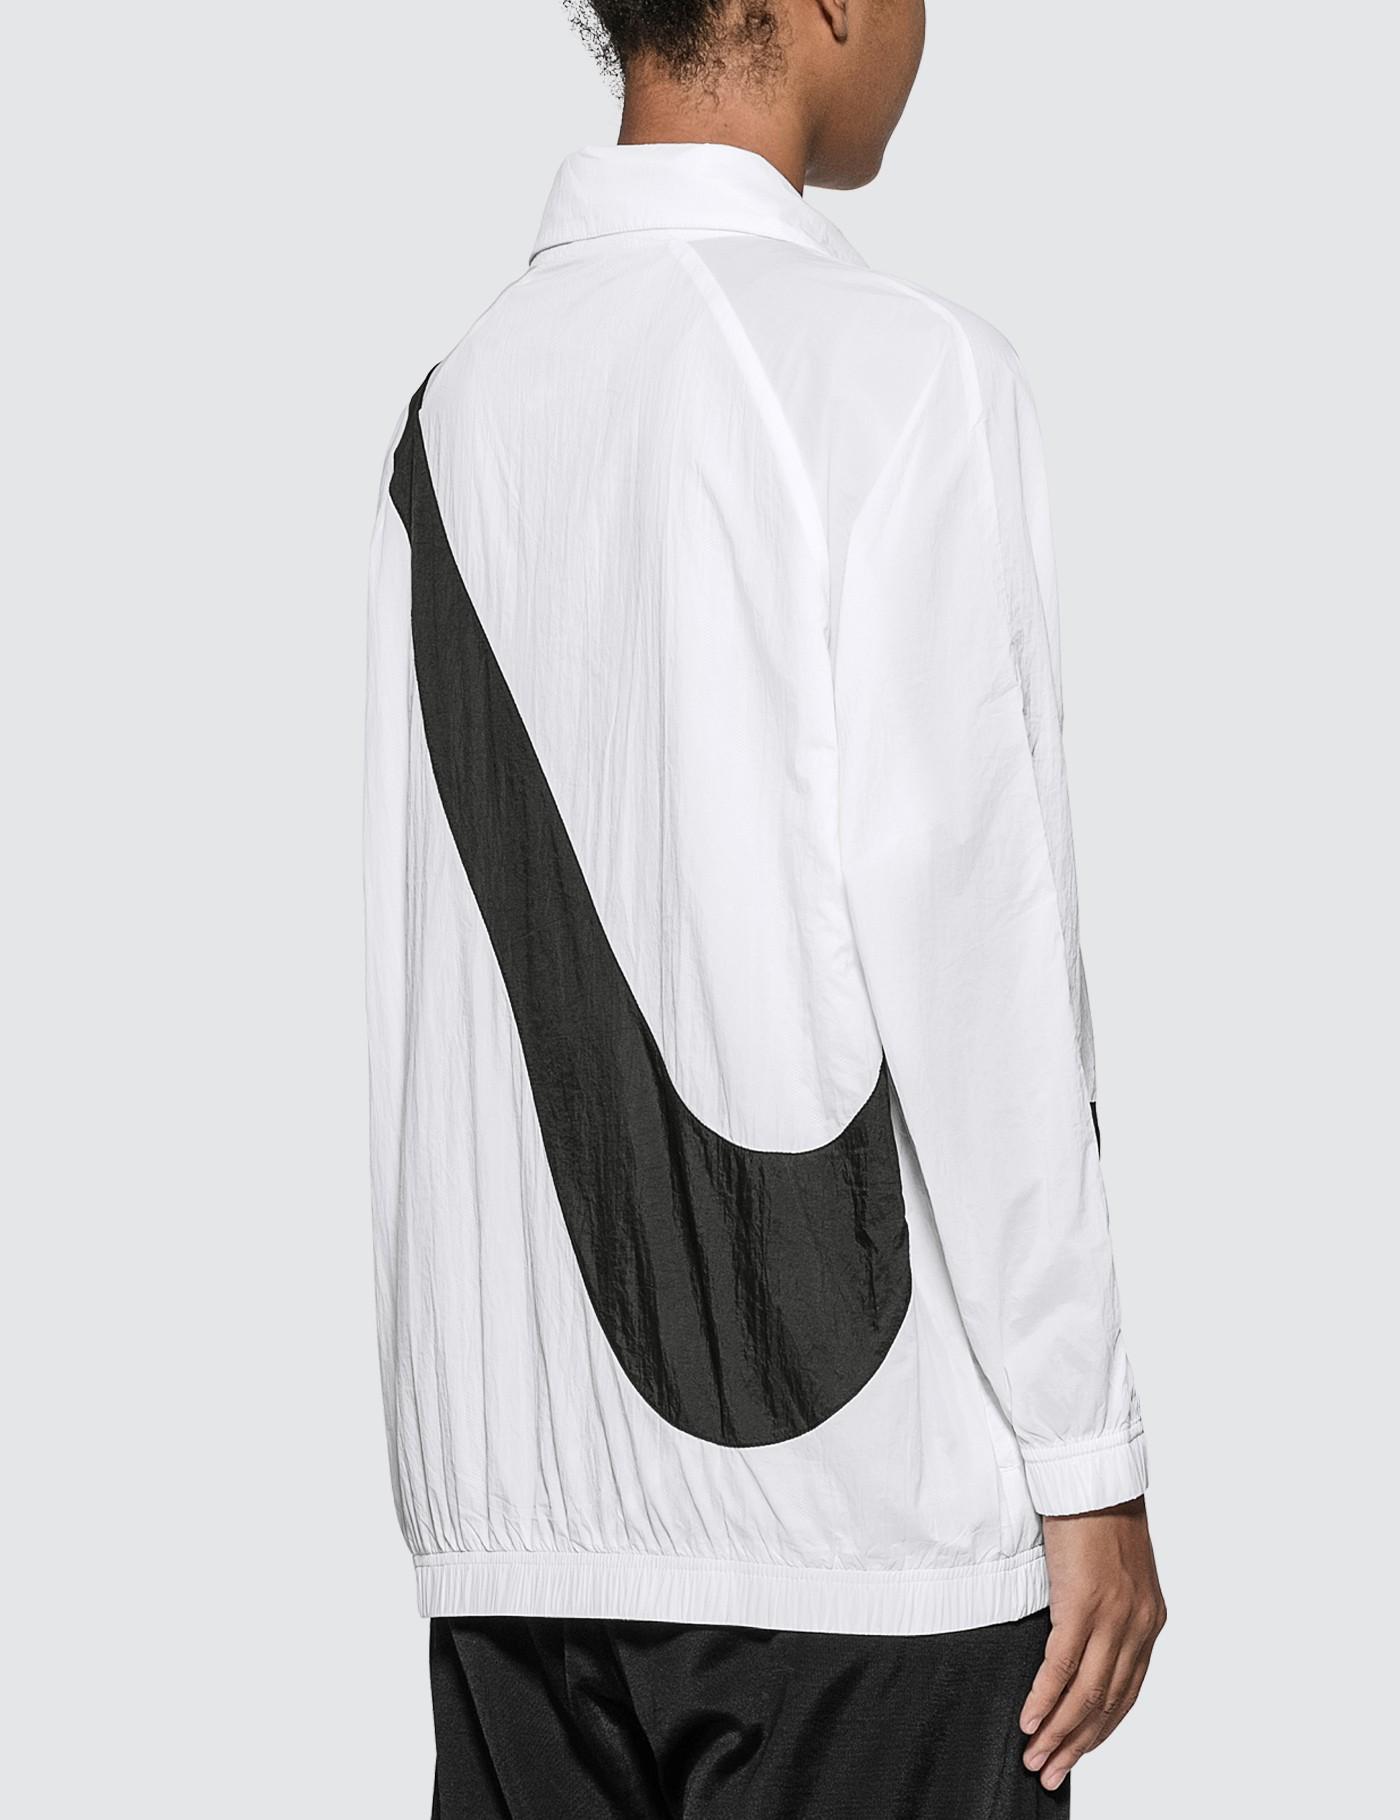 Nike Synthetic Swoosh Woven Jacket in White - Lyst